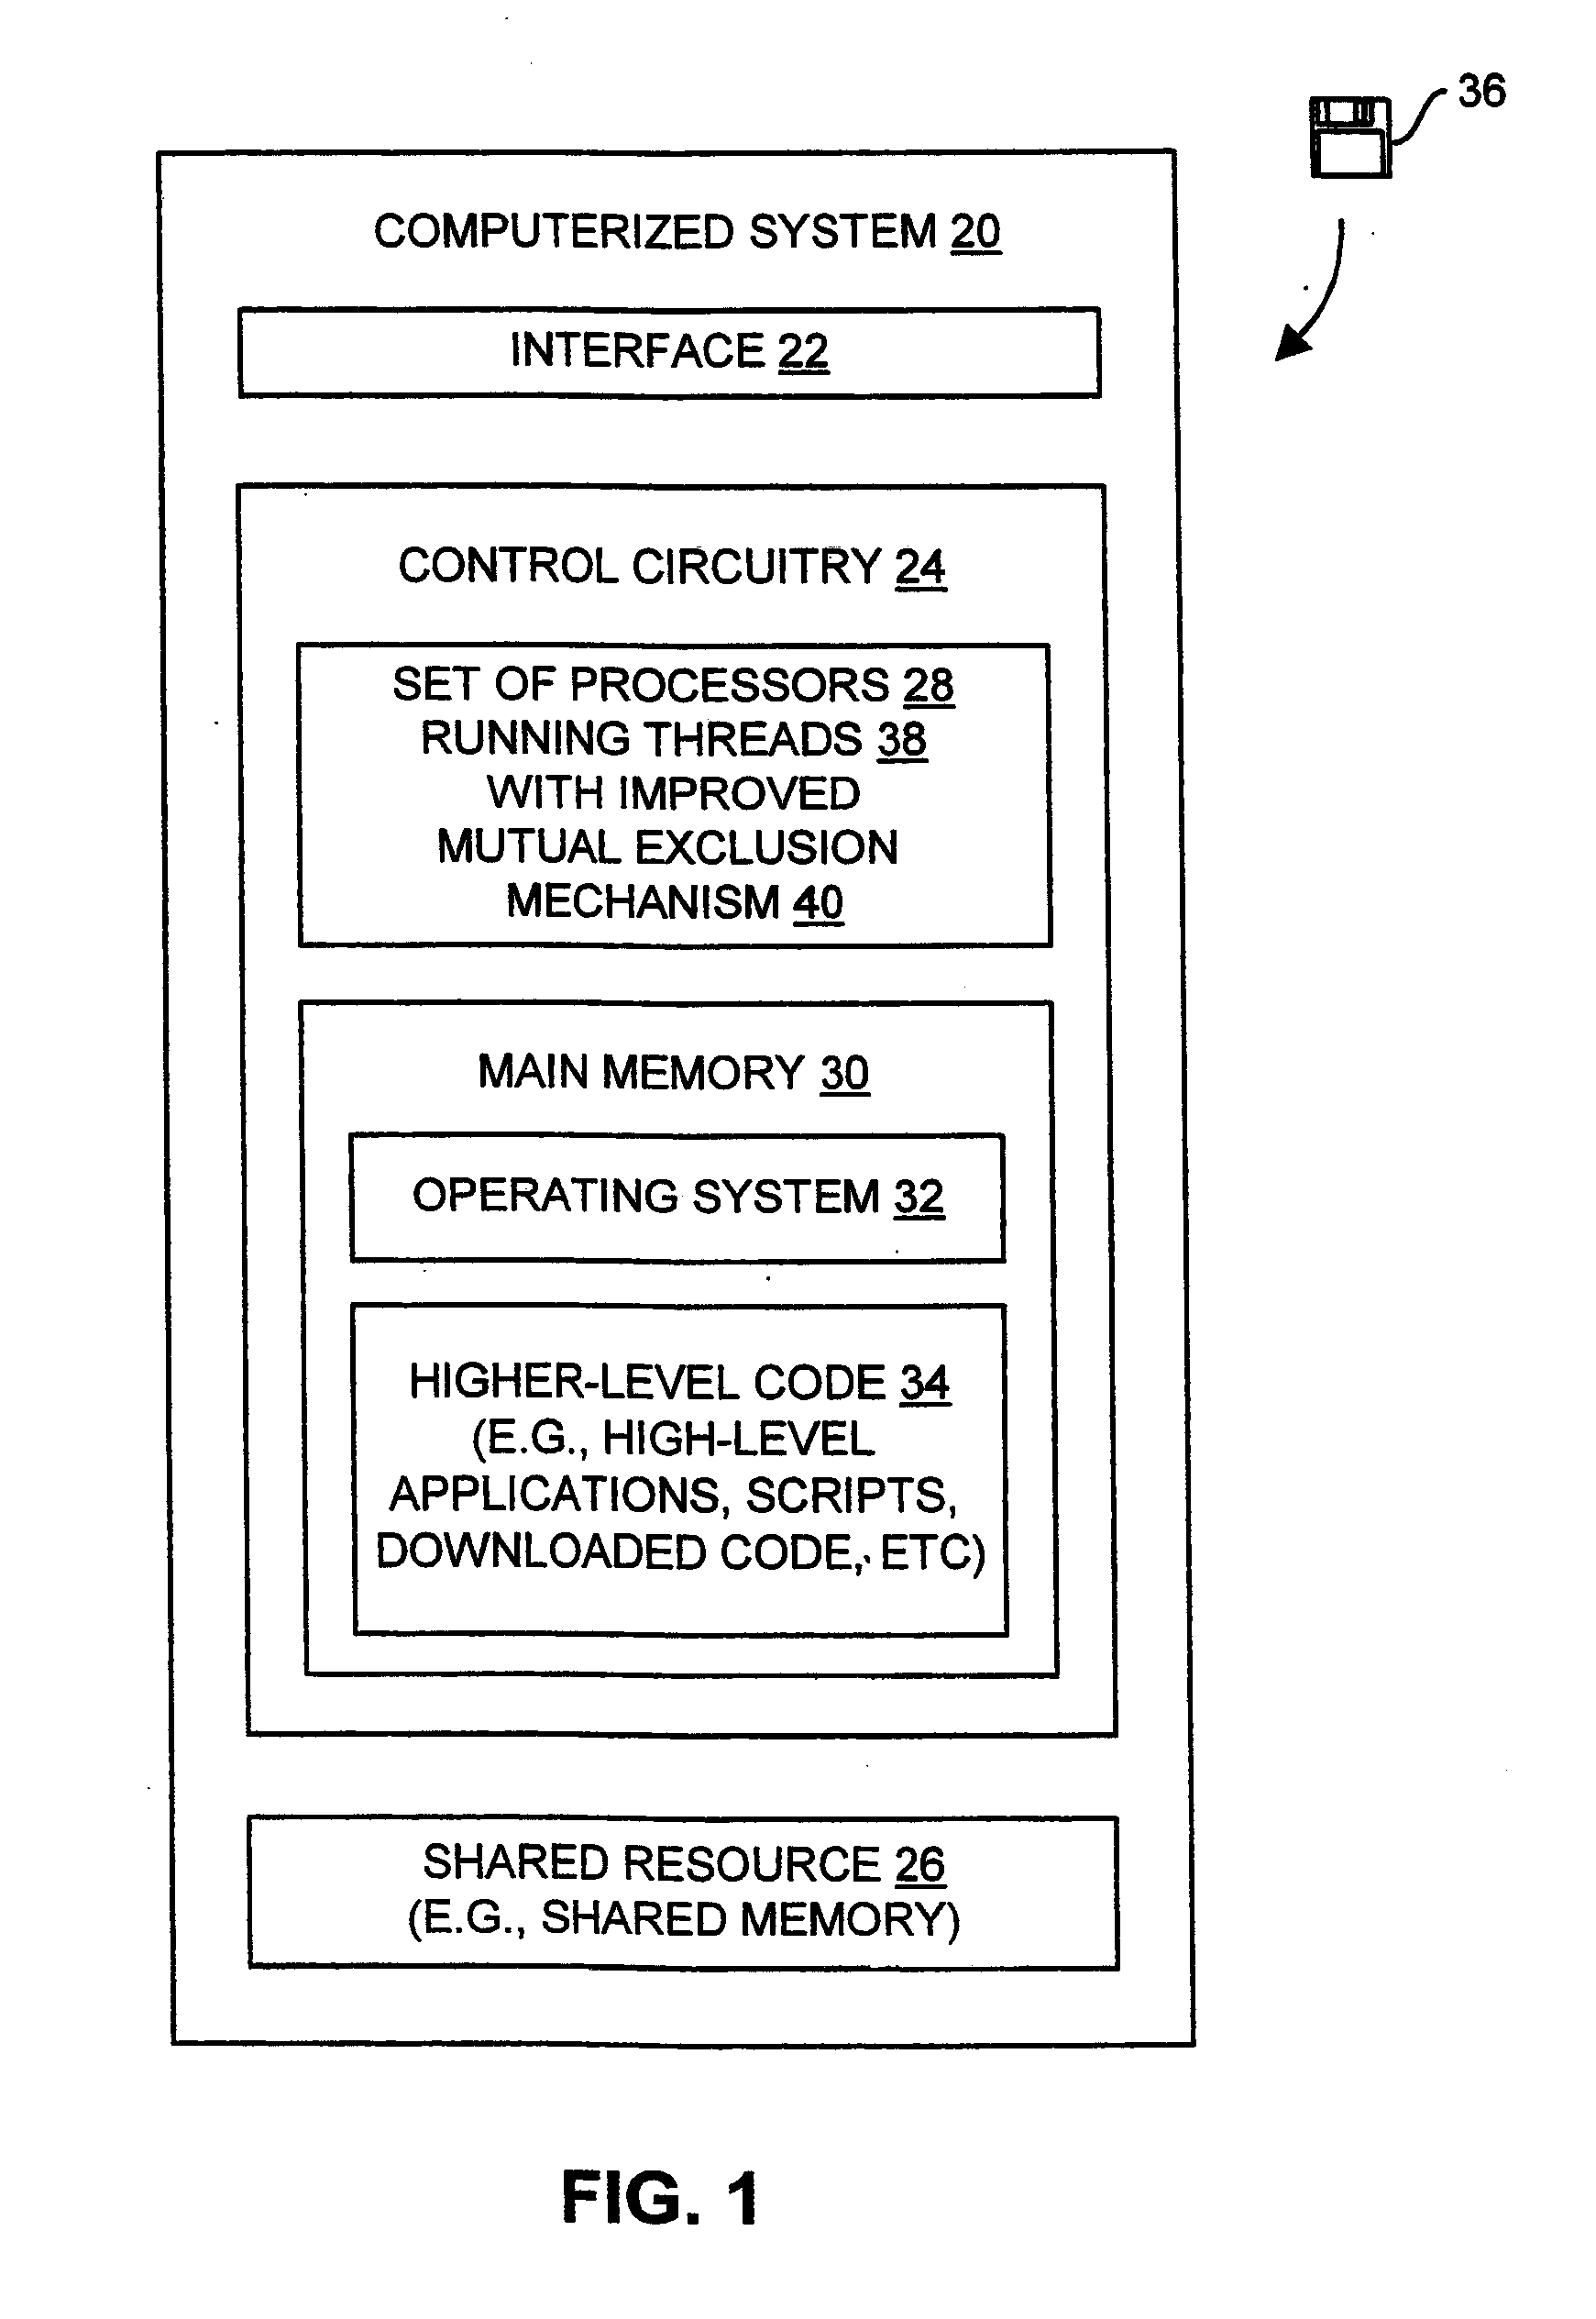 Adaptive spin-then-block mutual exclusion in multi-threaded processing